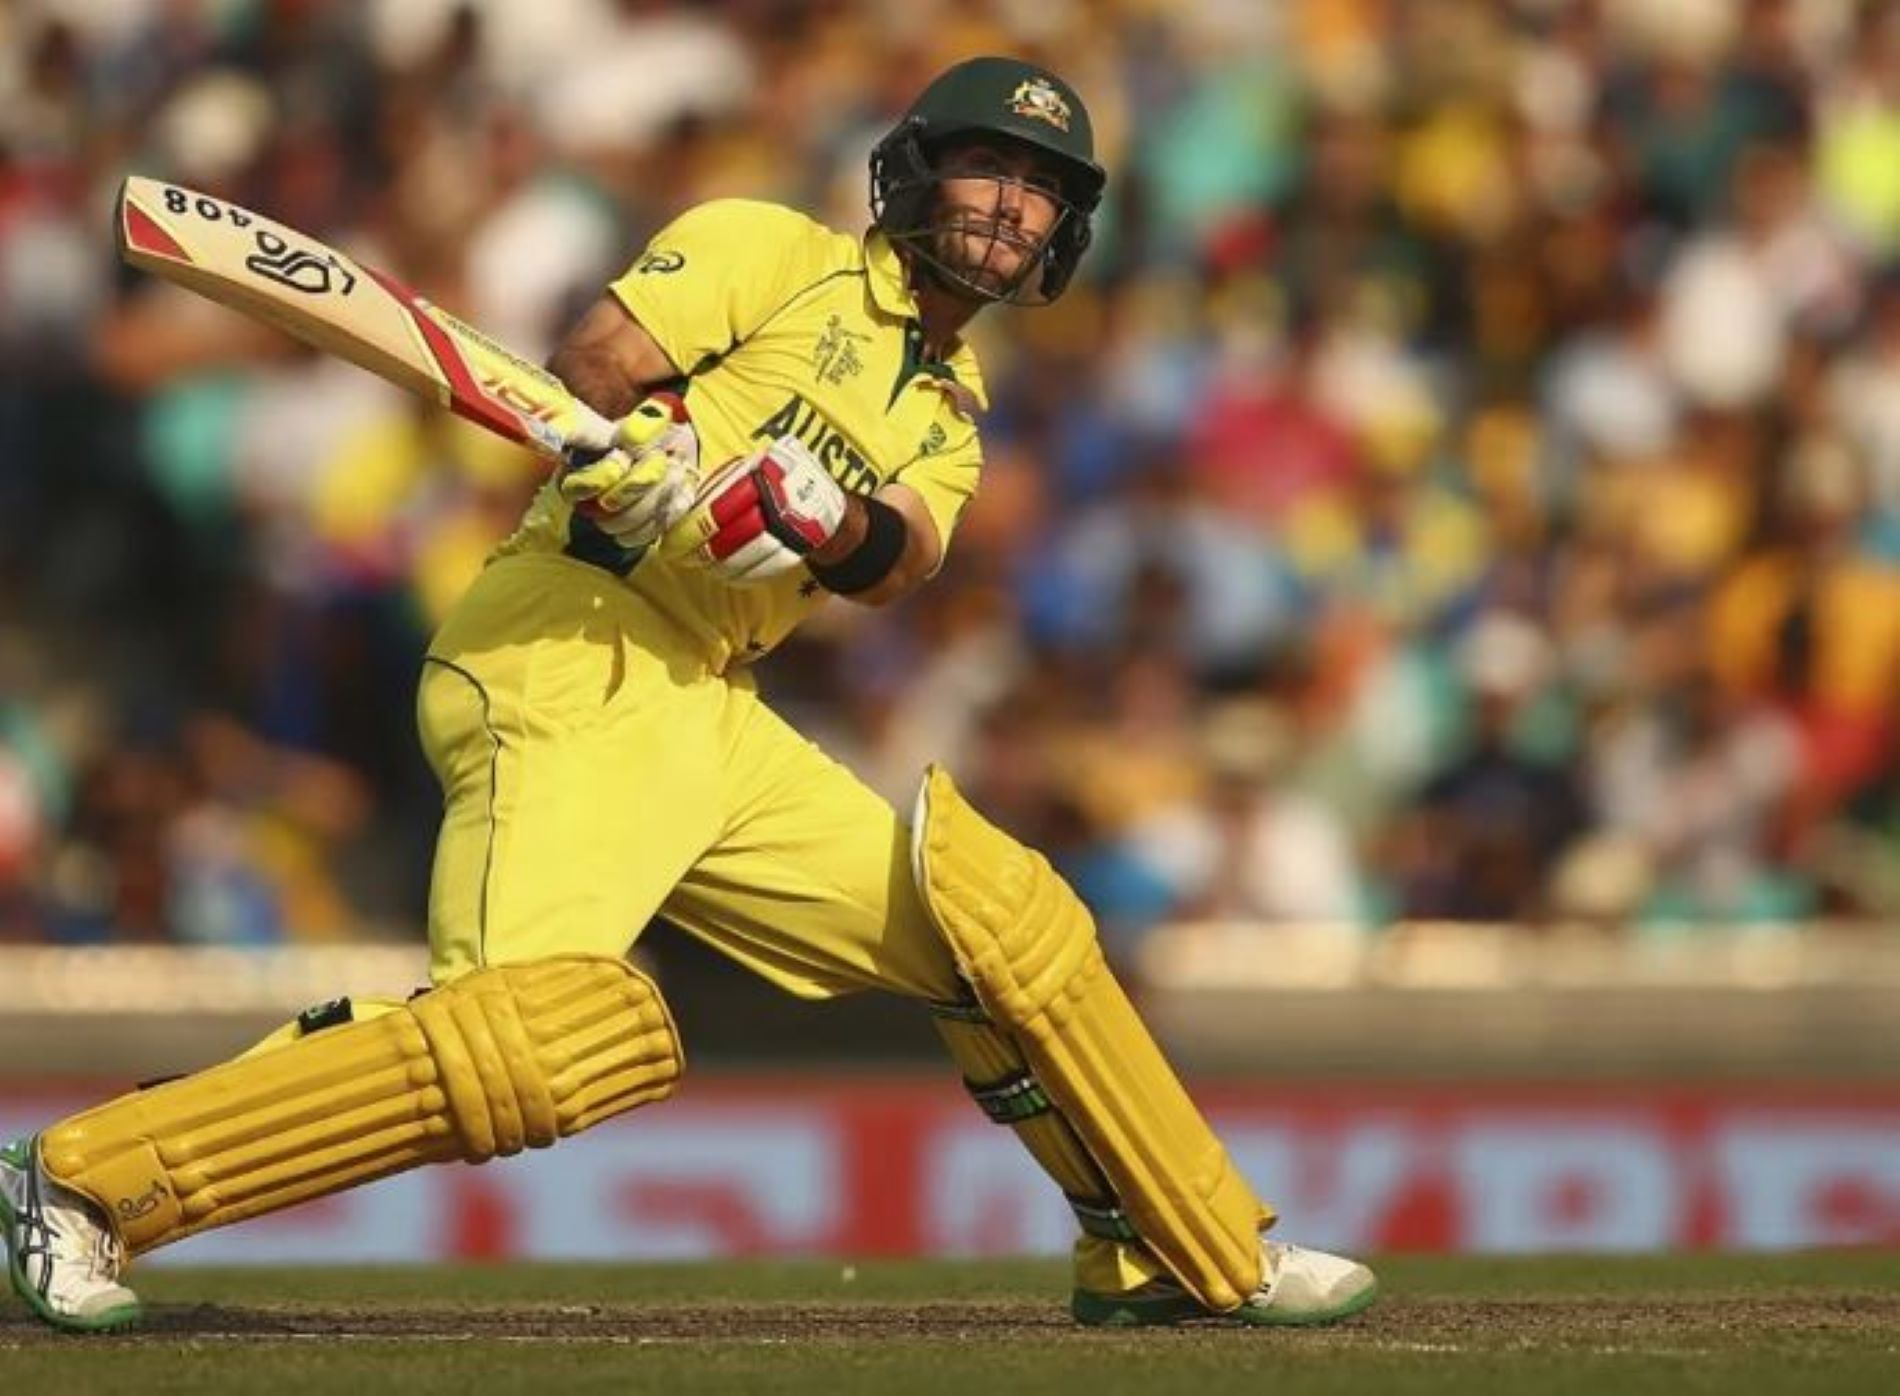 Maxwell played a vital role in Australia winning the 2015 ODI World Cup